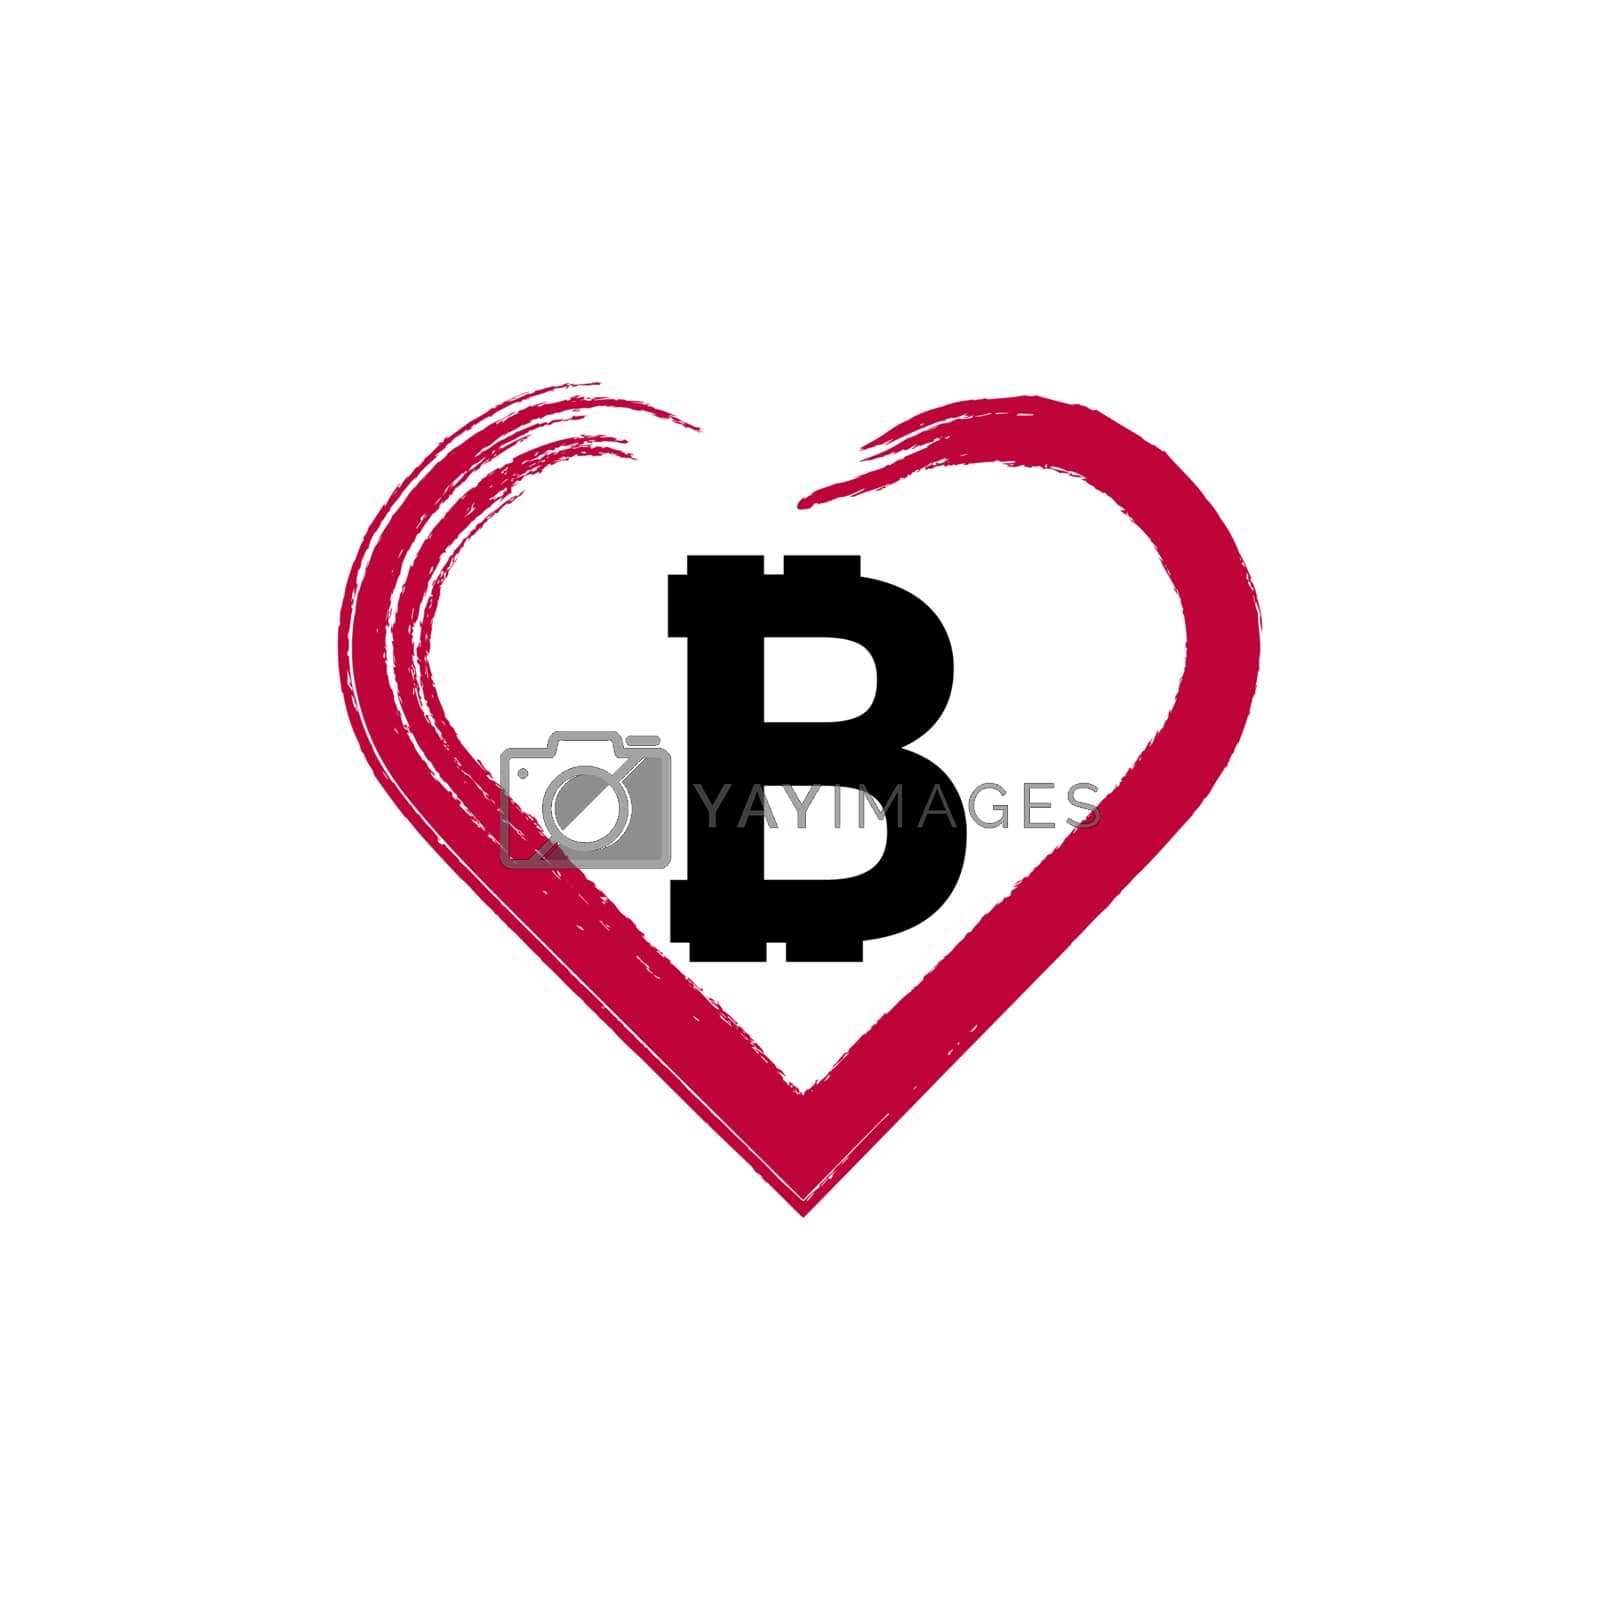 Royalty free image of Illustration of a long shadow red heart with a bitcoin sign by Denzelll